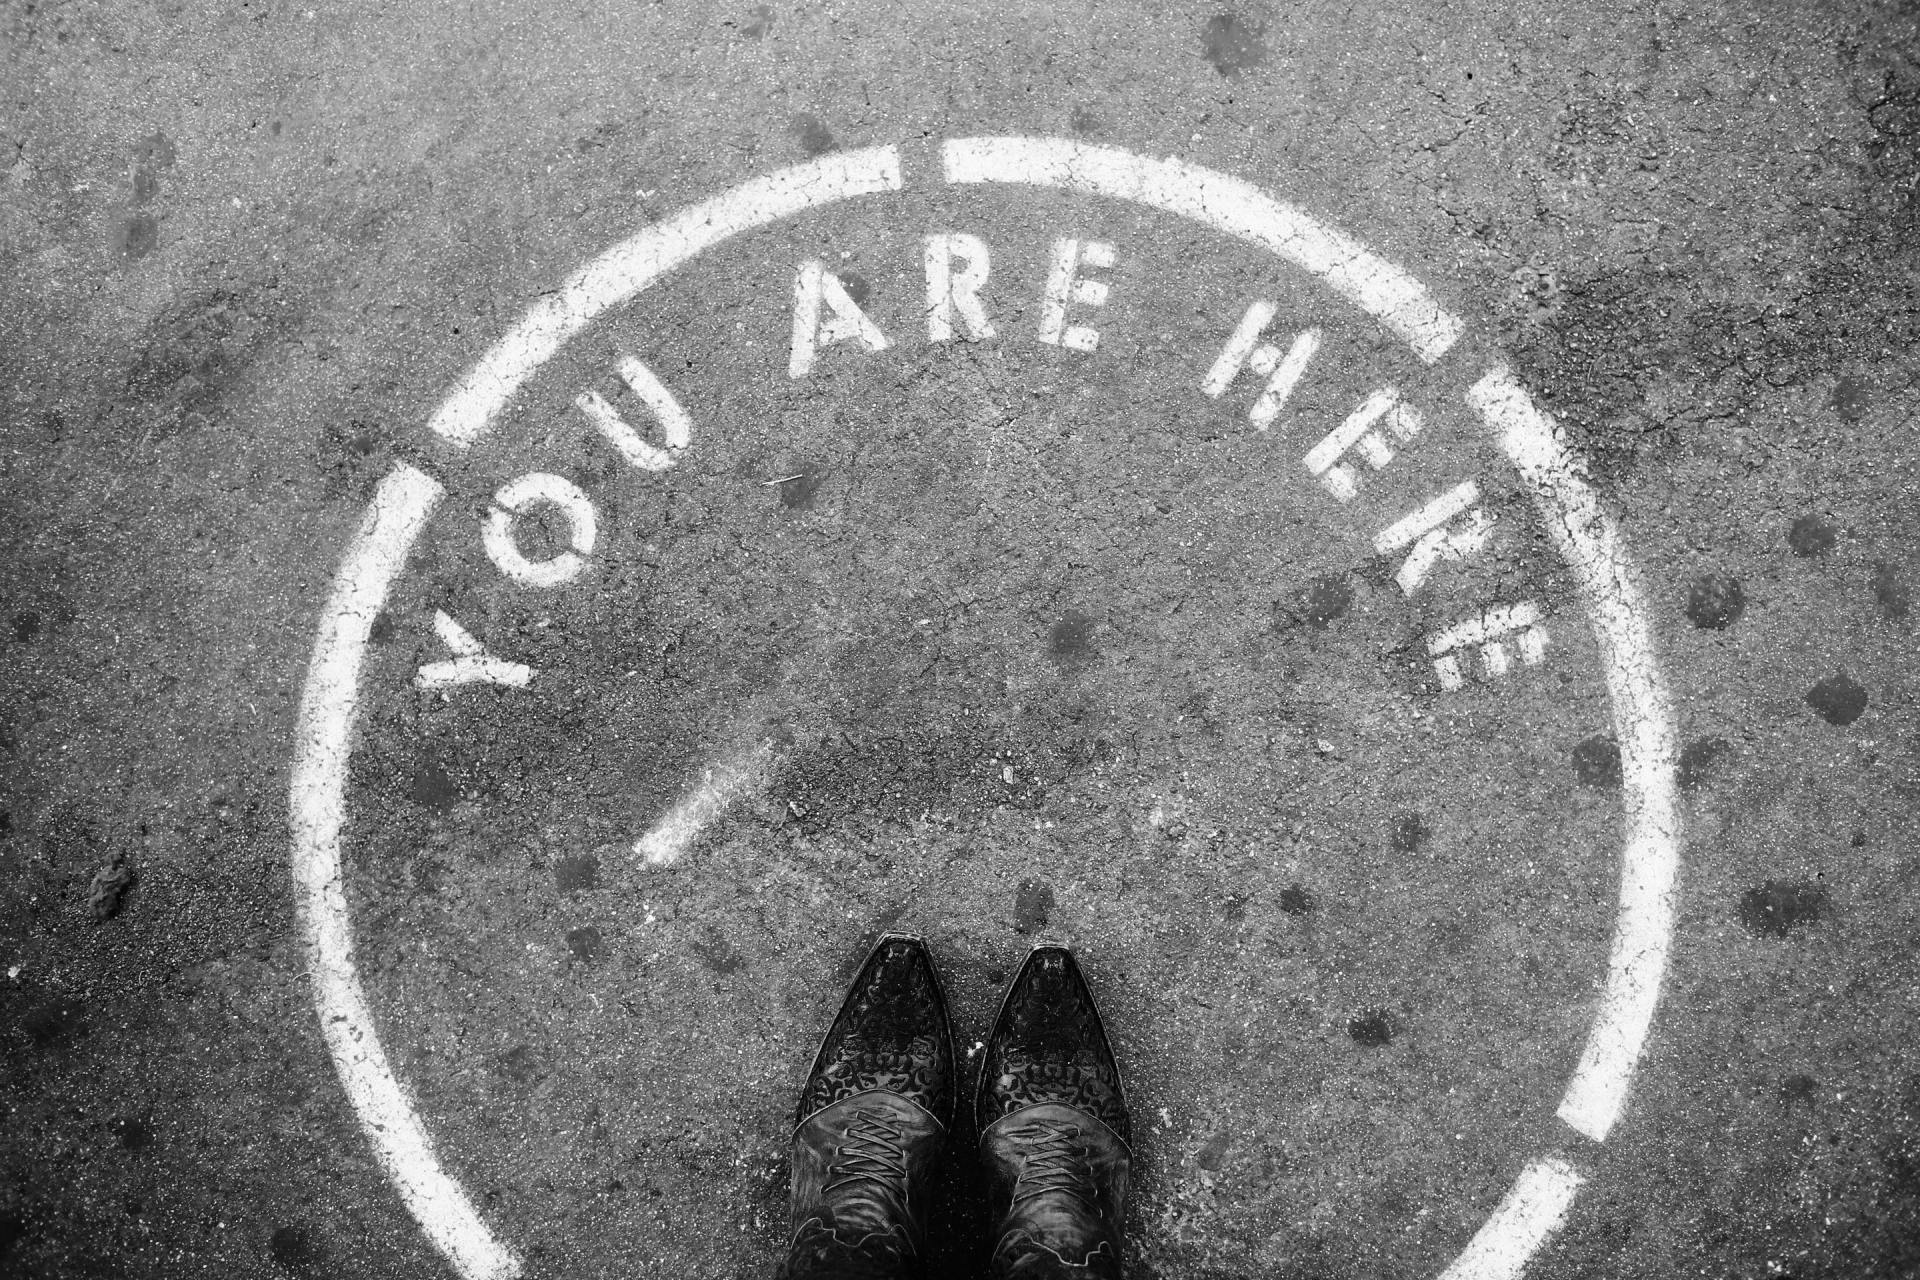 a person is standing in a circle with the words `` you are here '' painted on the ground .